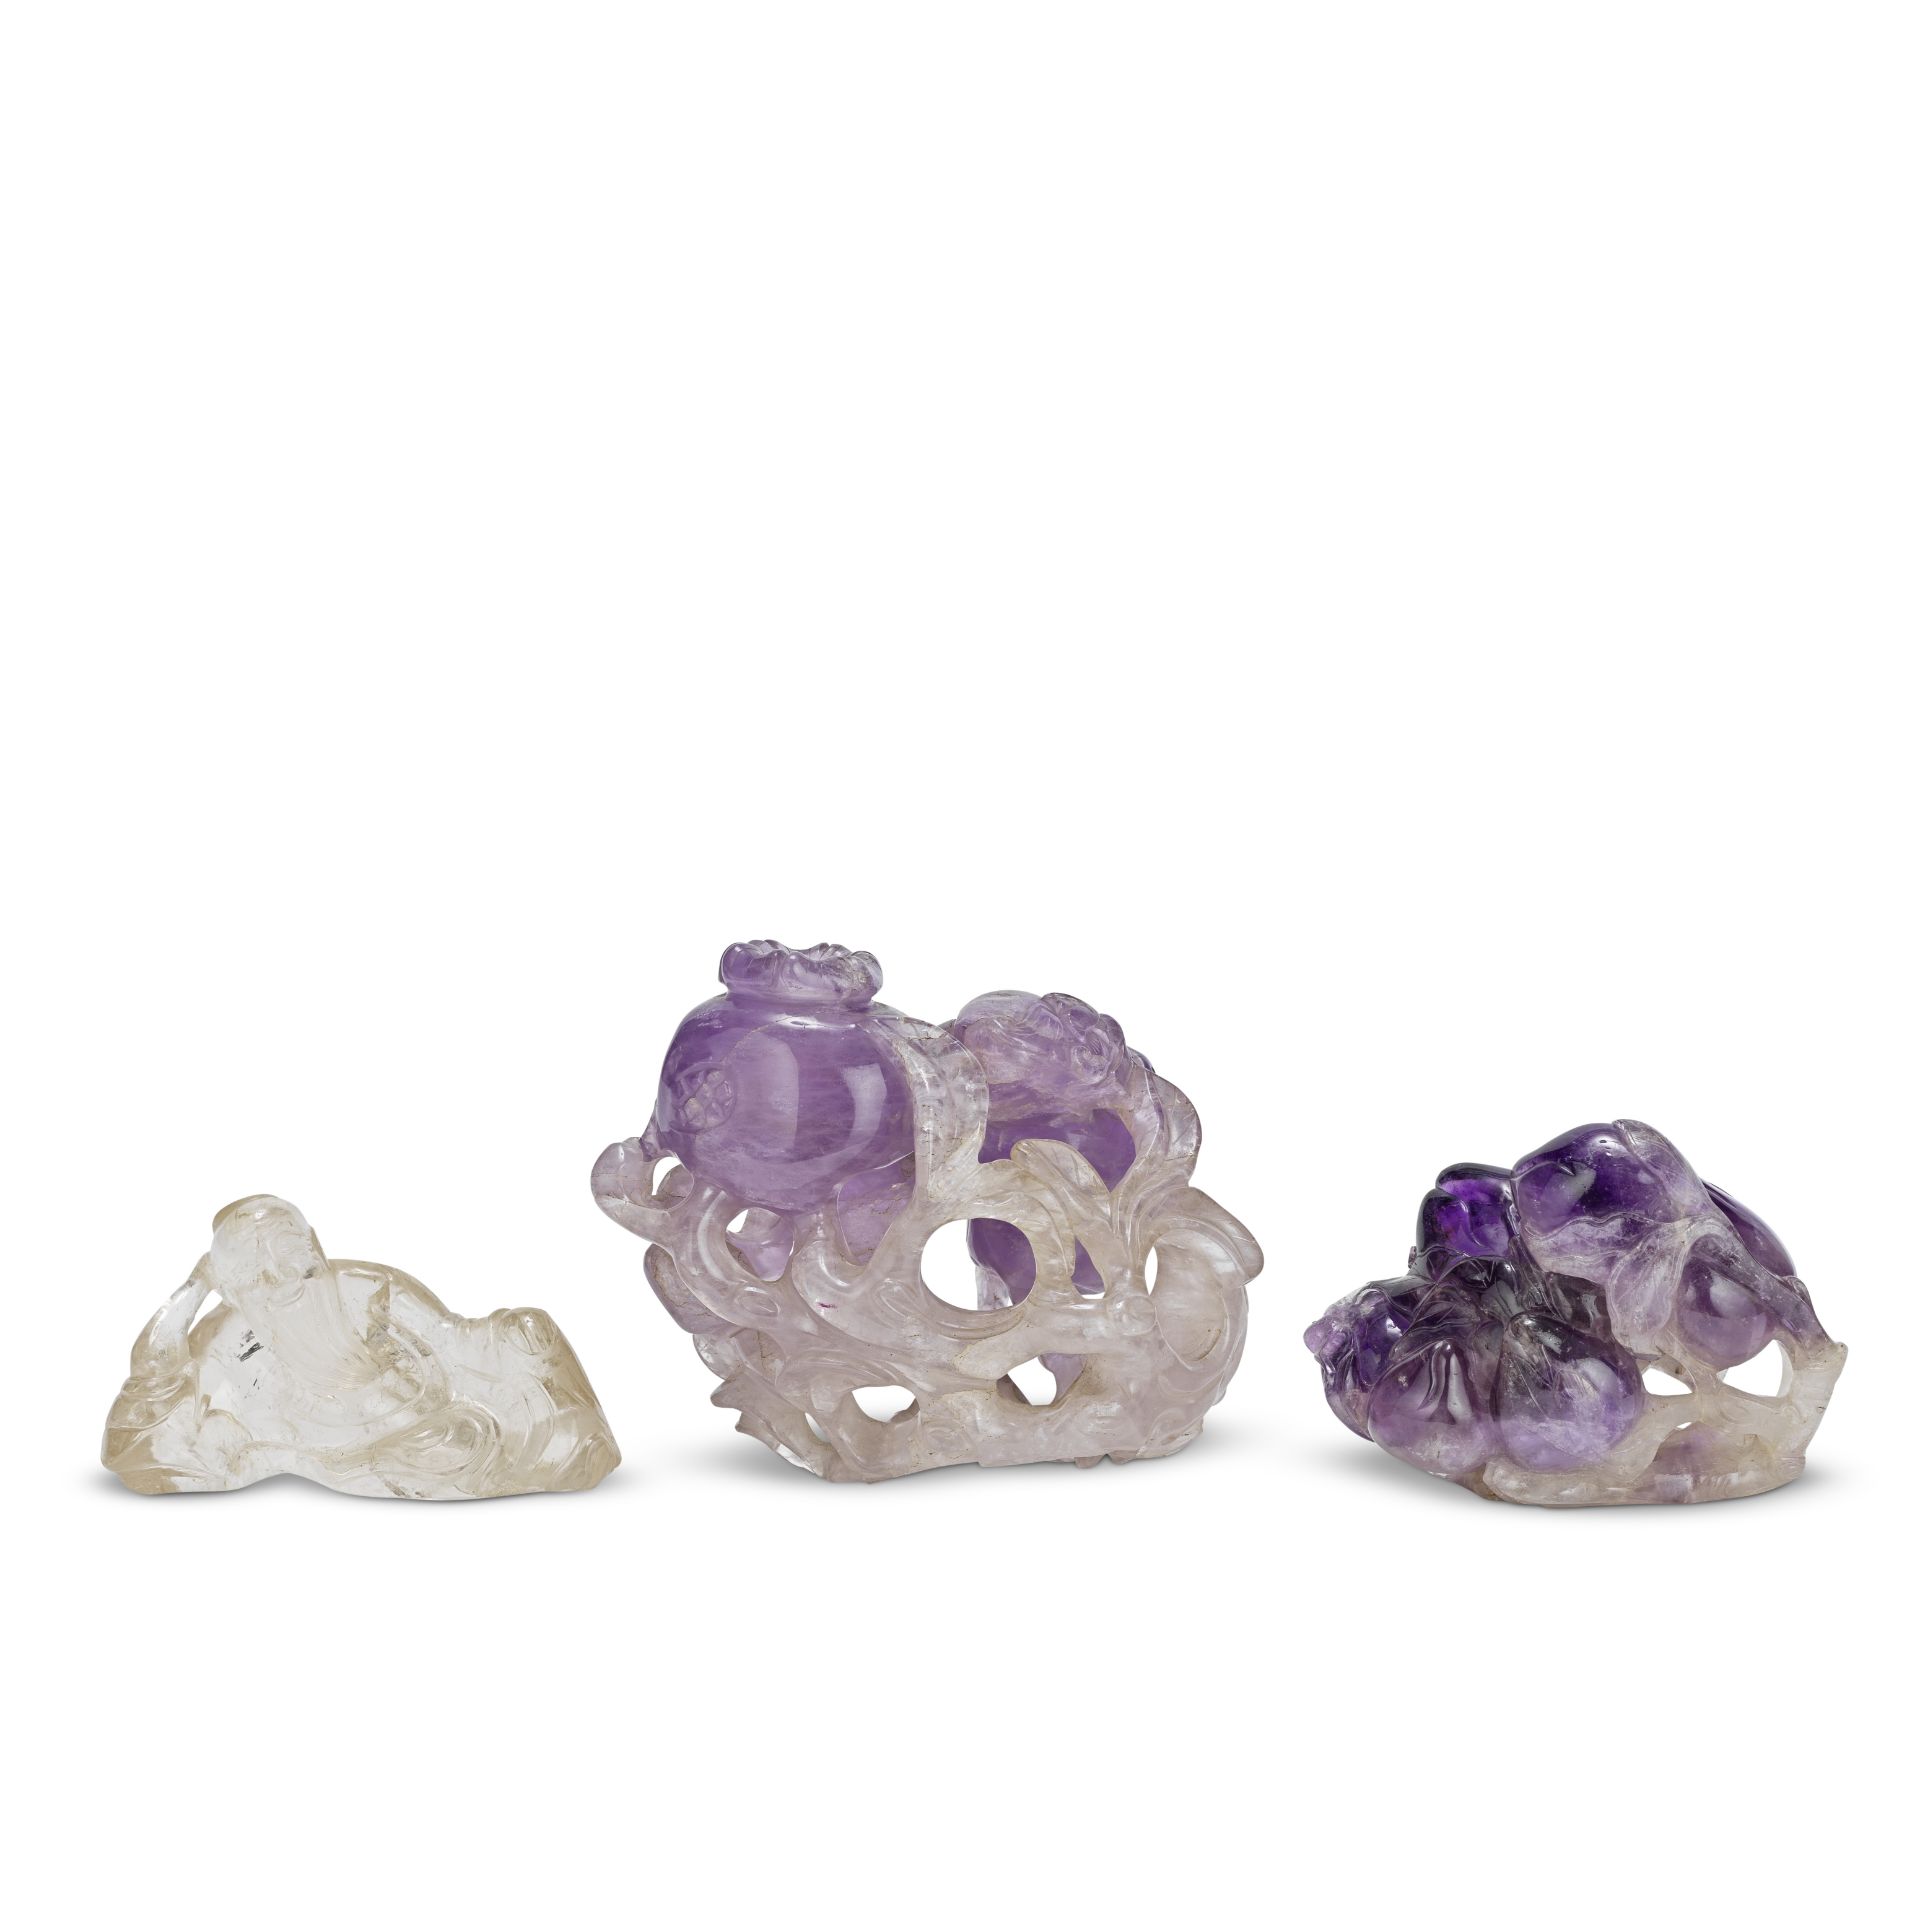 TWO CARVED AMETHYST 'FRUIT' CARVINGS AND A ROCK CRYSTAL 'LI BAI' CARVING 19th century (3)